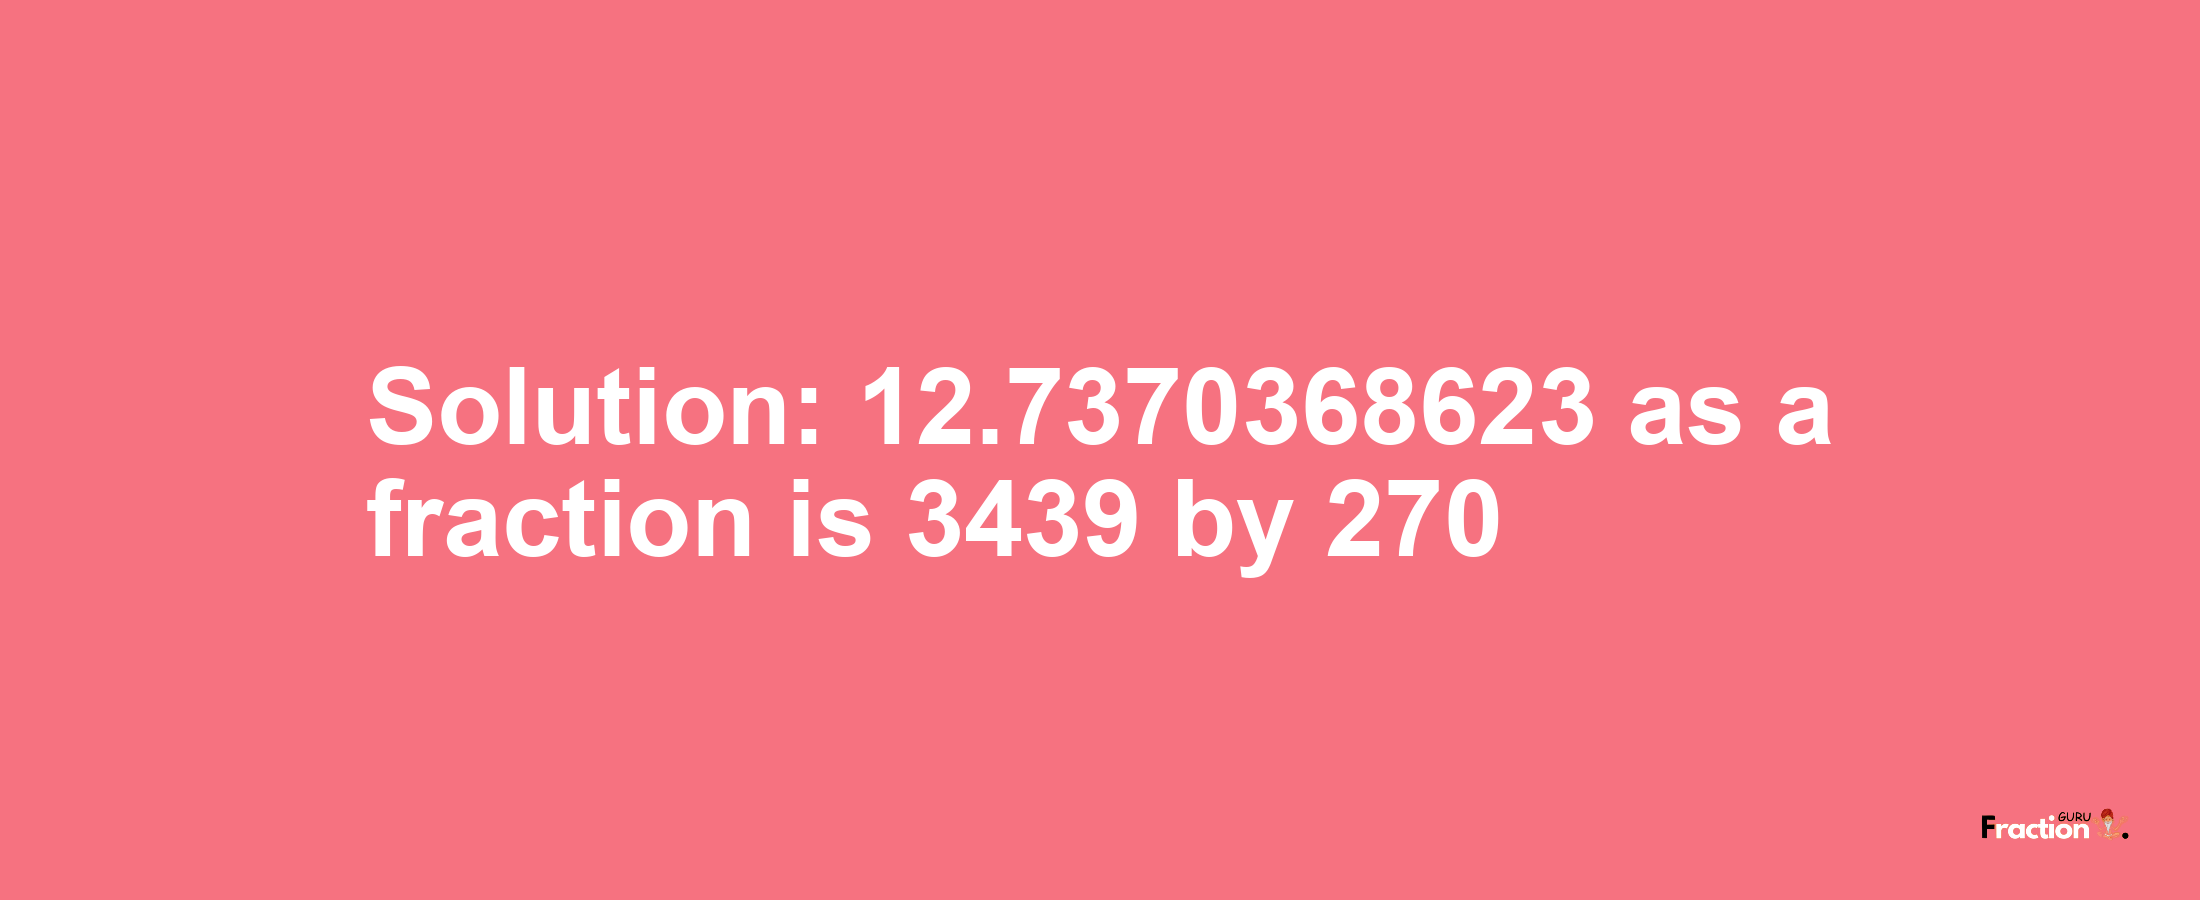 Solution:12.7370368623 as a fraction is 3439/270